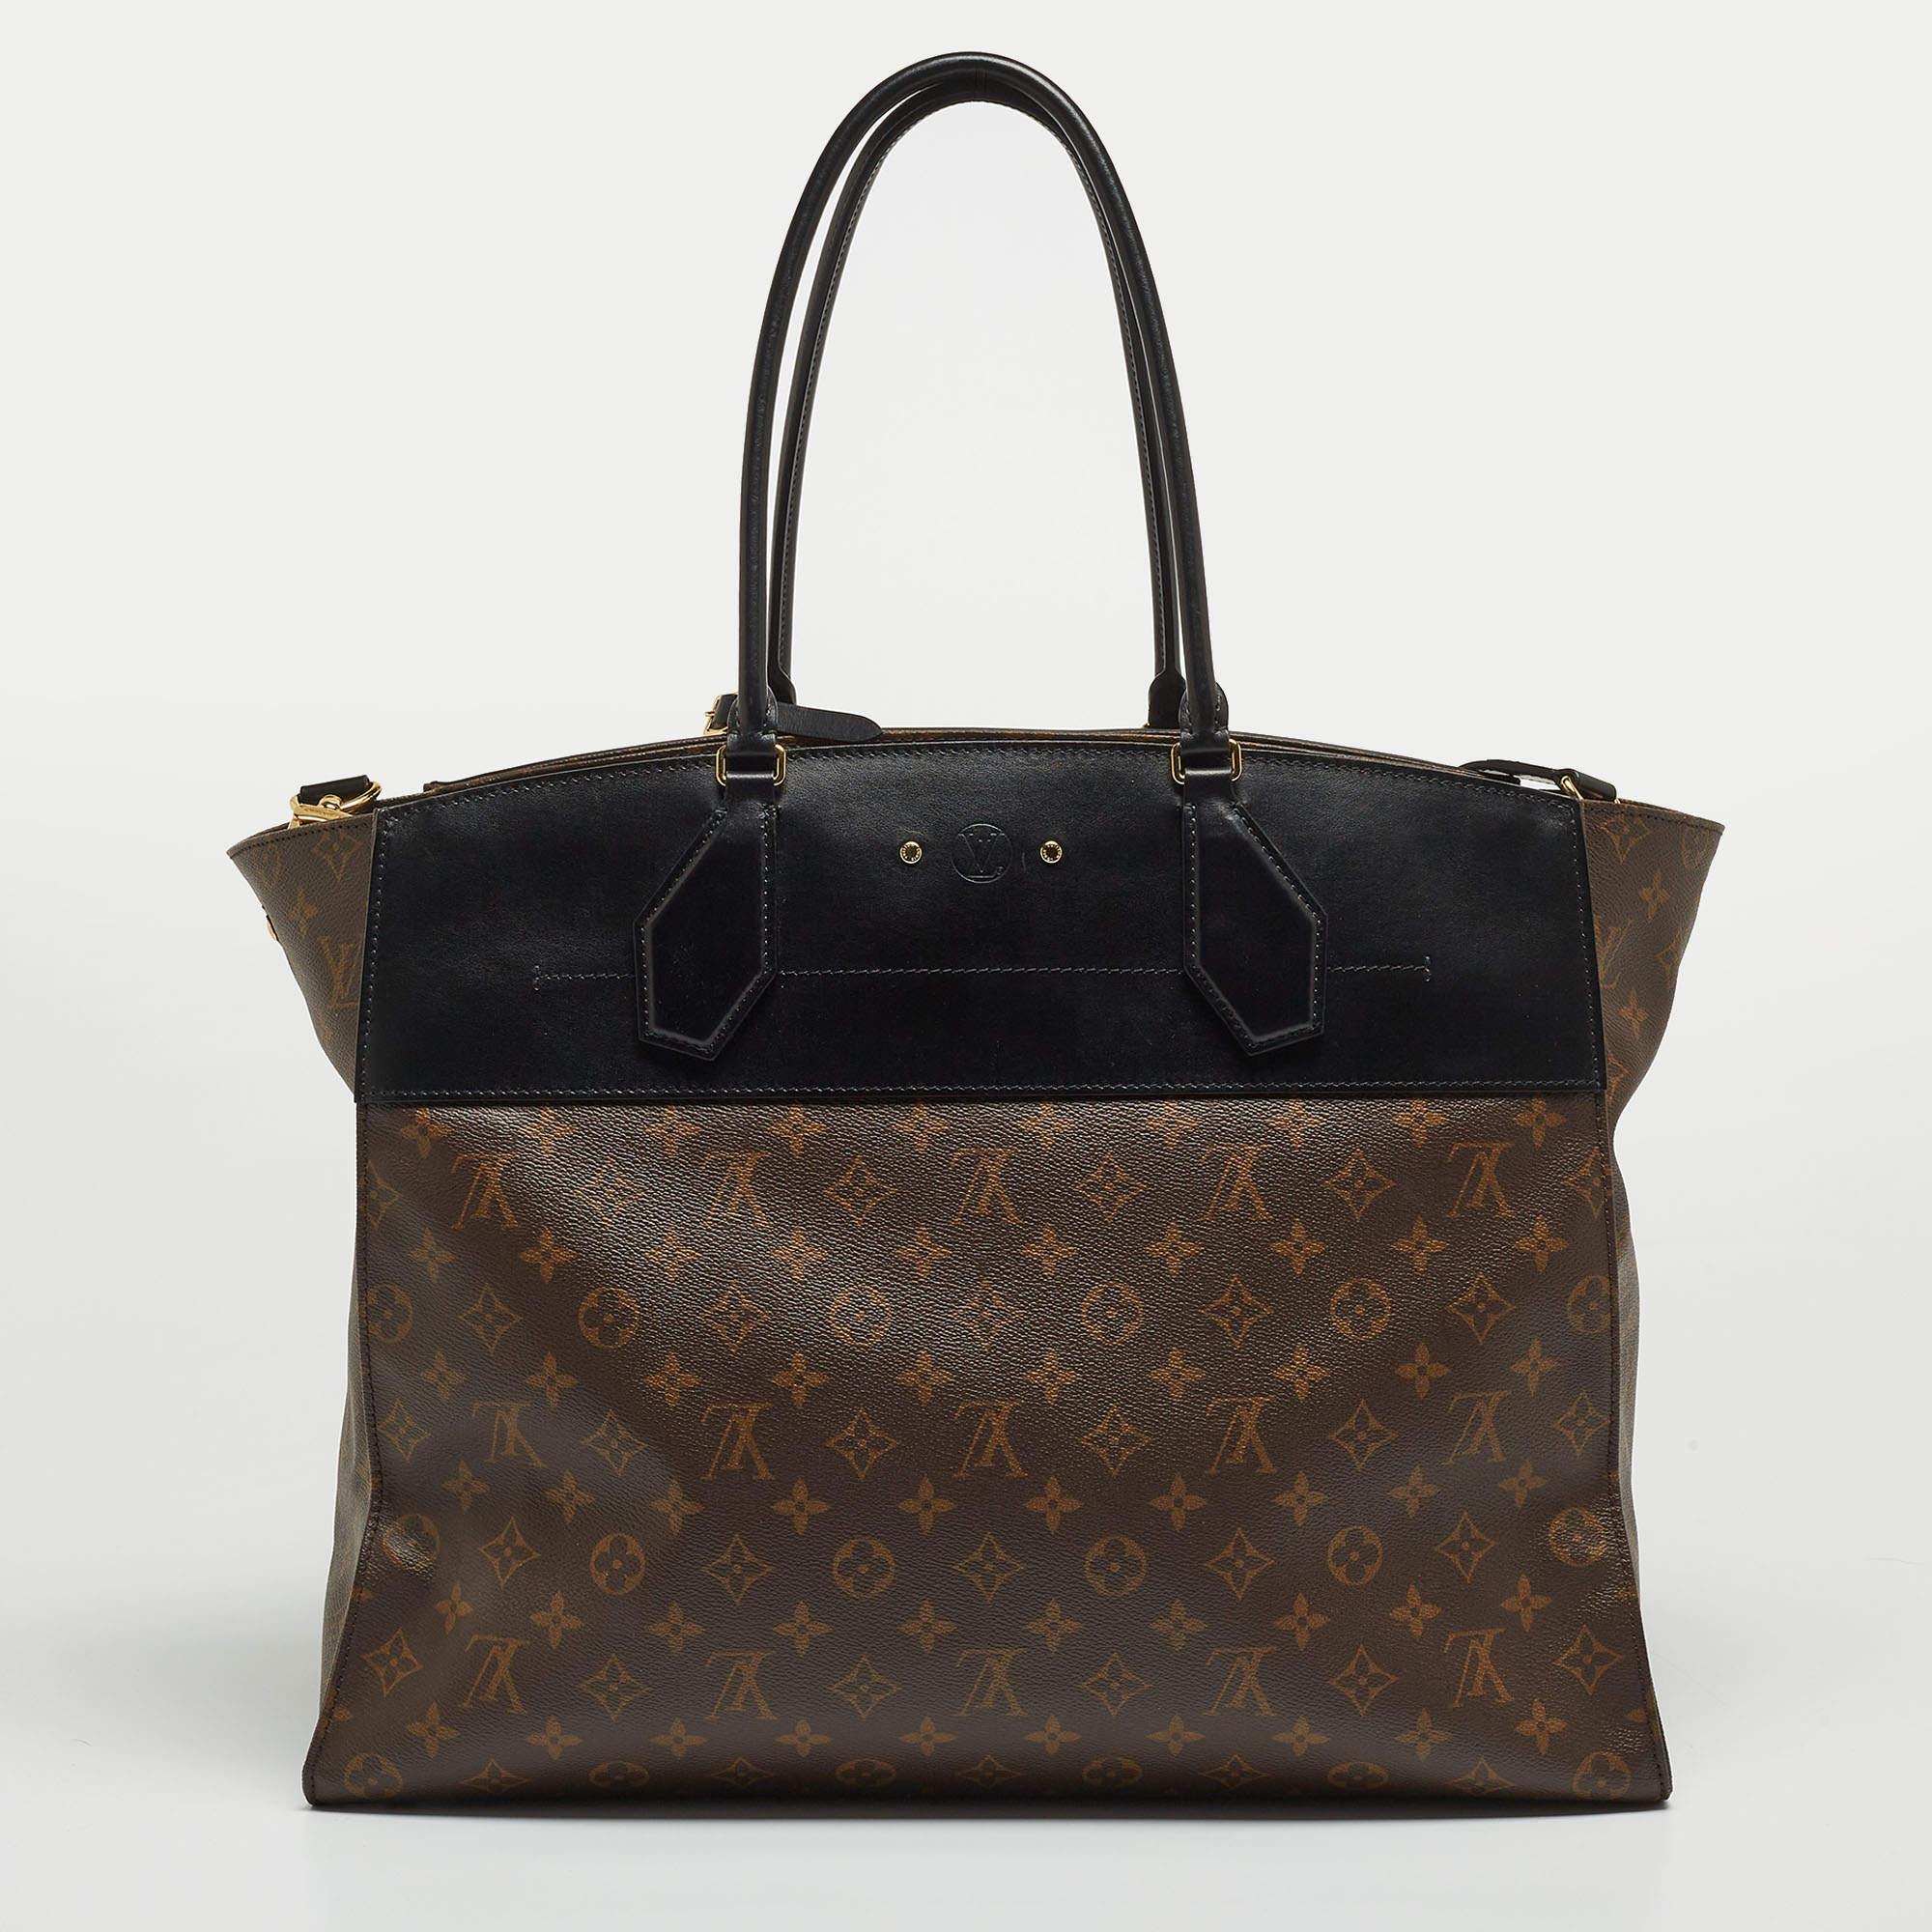 The Louis Vuitton City Steamer bag is an elegant and iconic accessory. It features a black canvas adorned with the signature LV monogram in canvas & leather, exuding timeless luxury. With its structured silhouette, gold-tone hardware, and